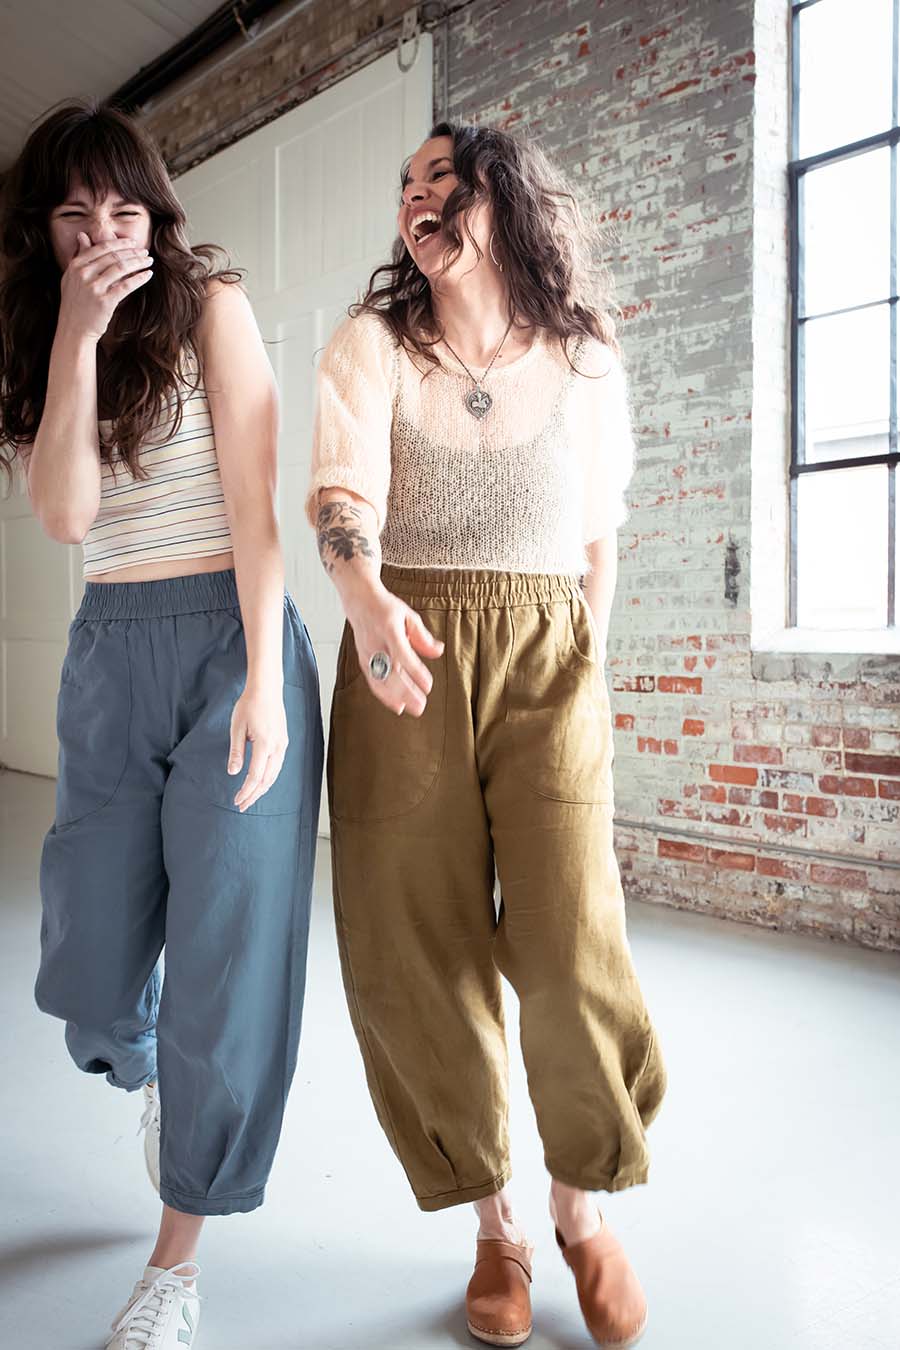 Meg and Meredith walking and lauging. Meg wears olive chanterelle pants and Meredith wears blue ones